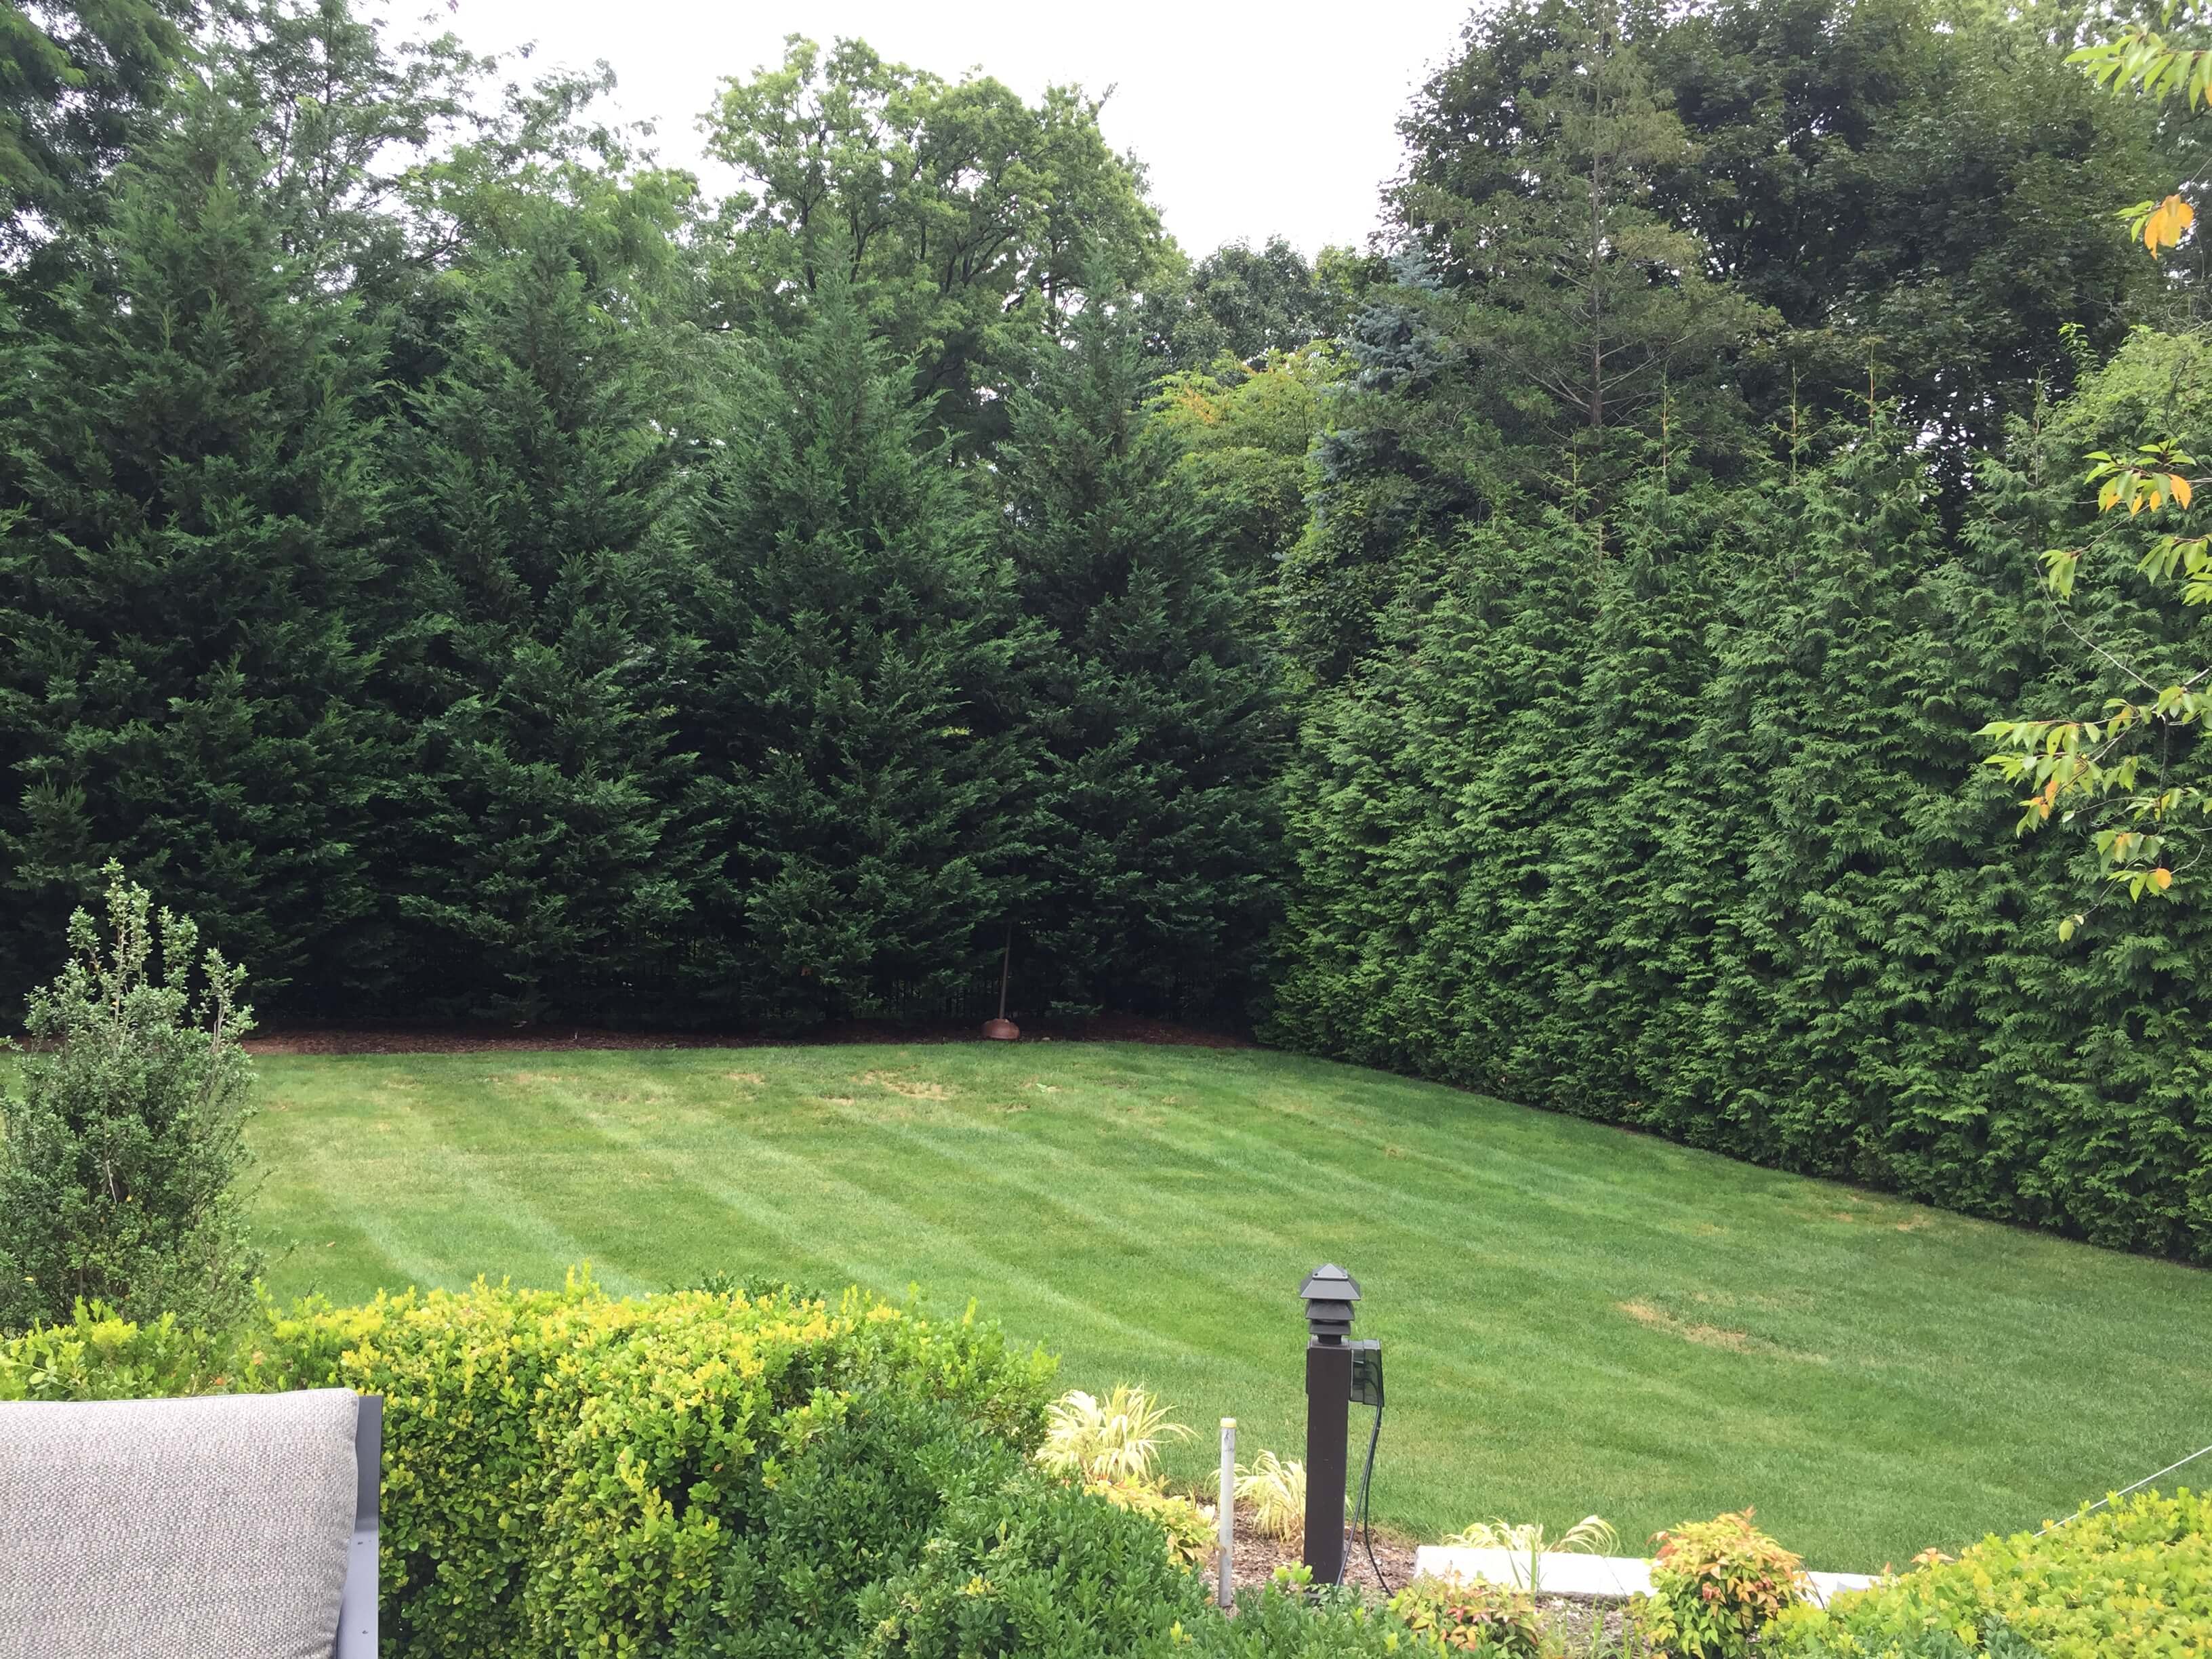 What Different Types Of Grass Grow In New Jersey - NJ Best Lawns,  Sprinklers & Fencing New Jersey